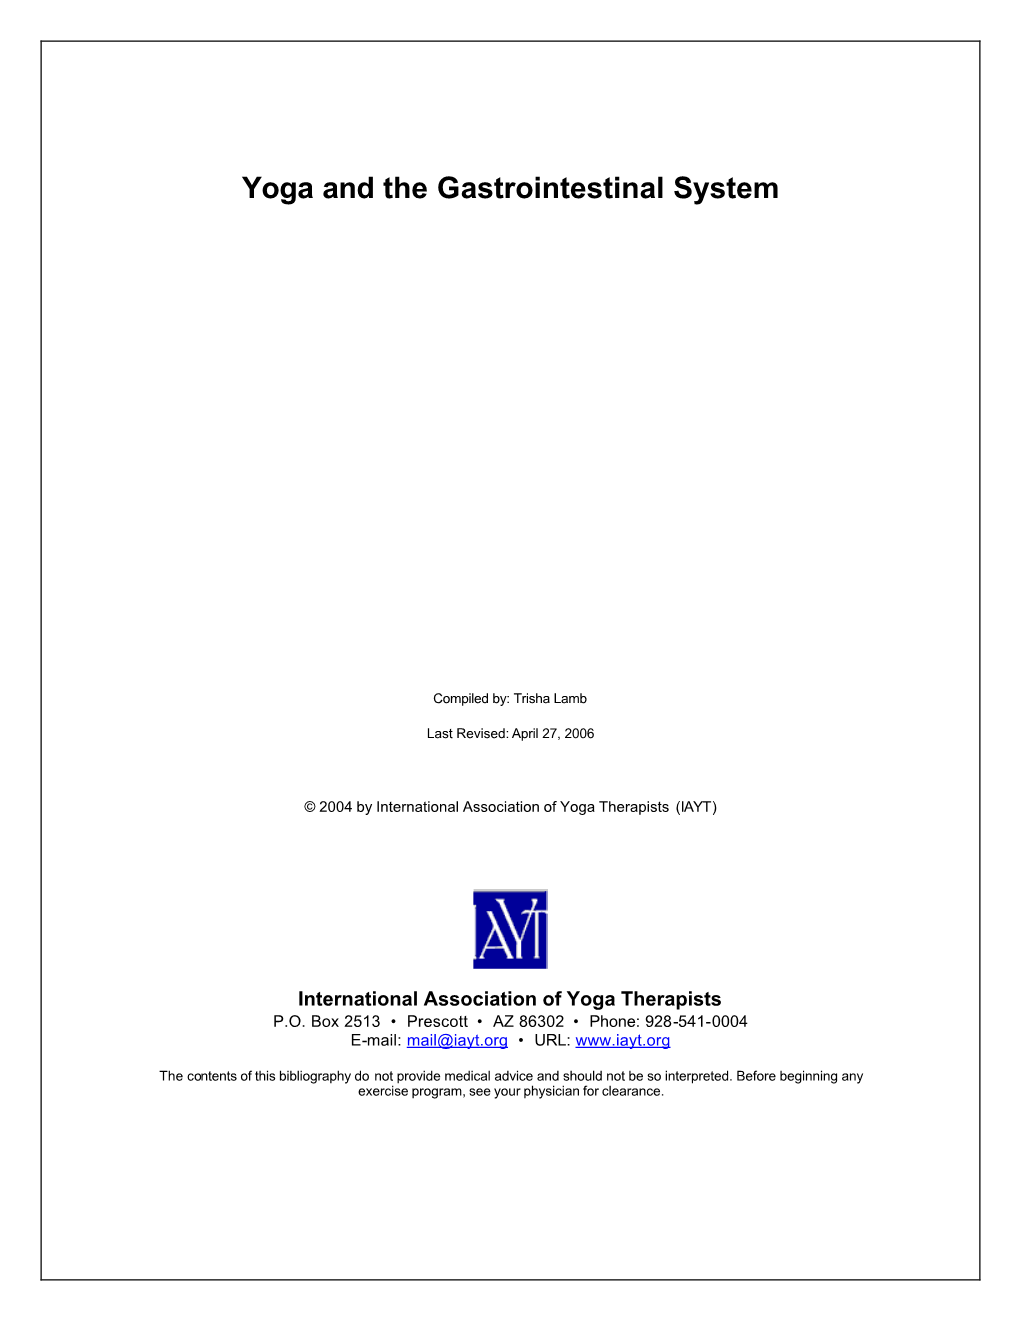 Yoga and the Gastrointestinal System